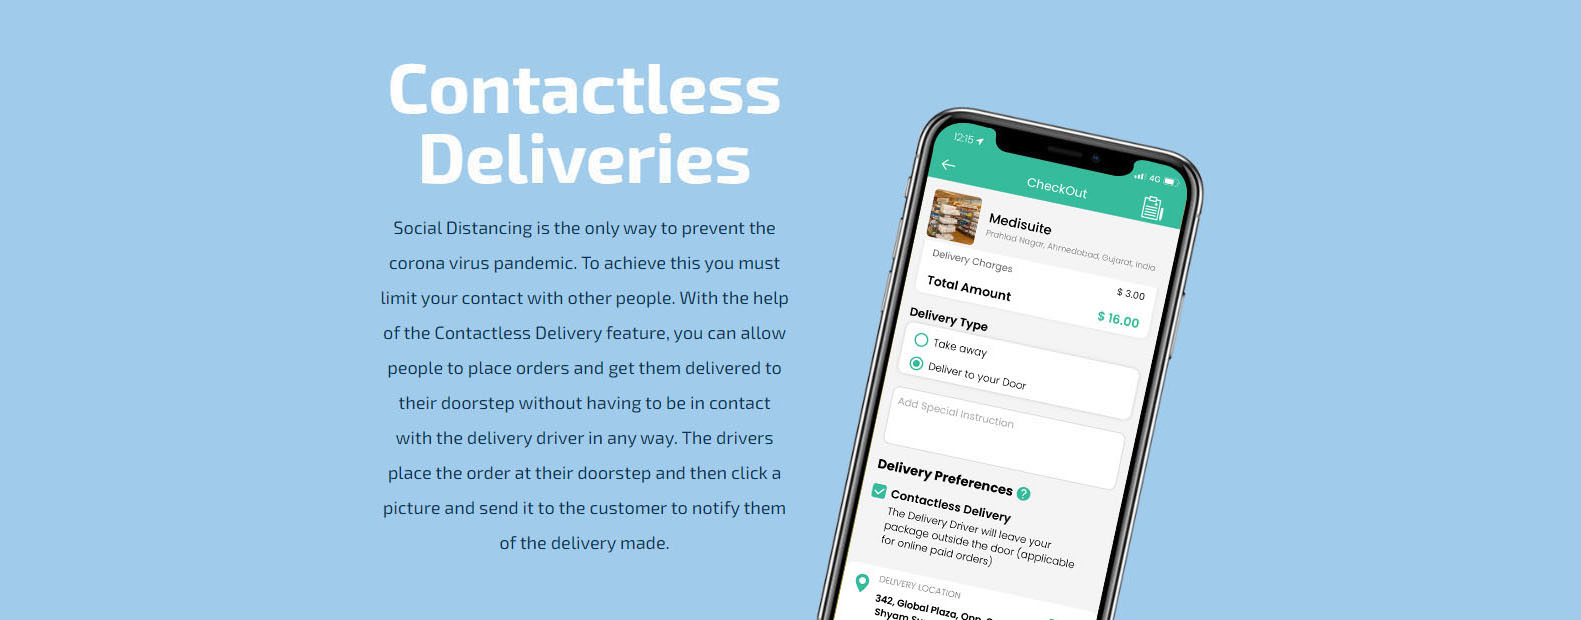 Contactless Deliveries